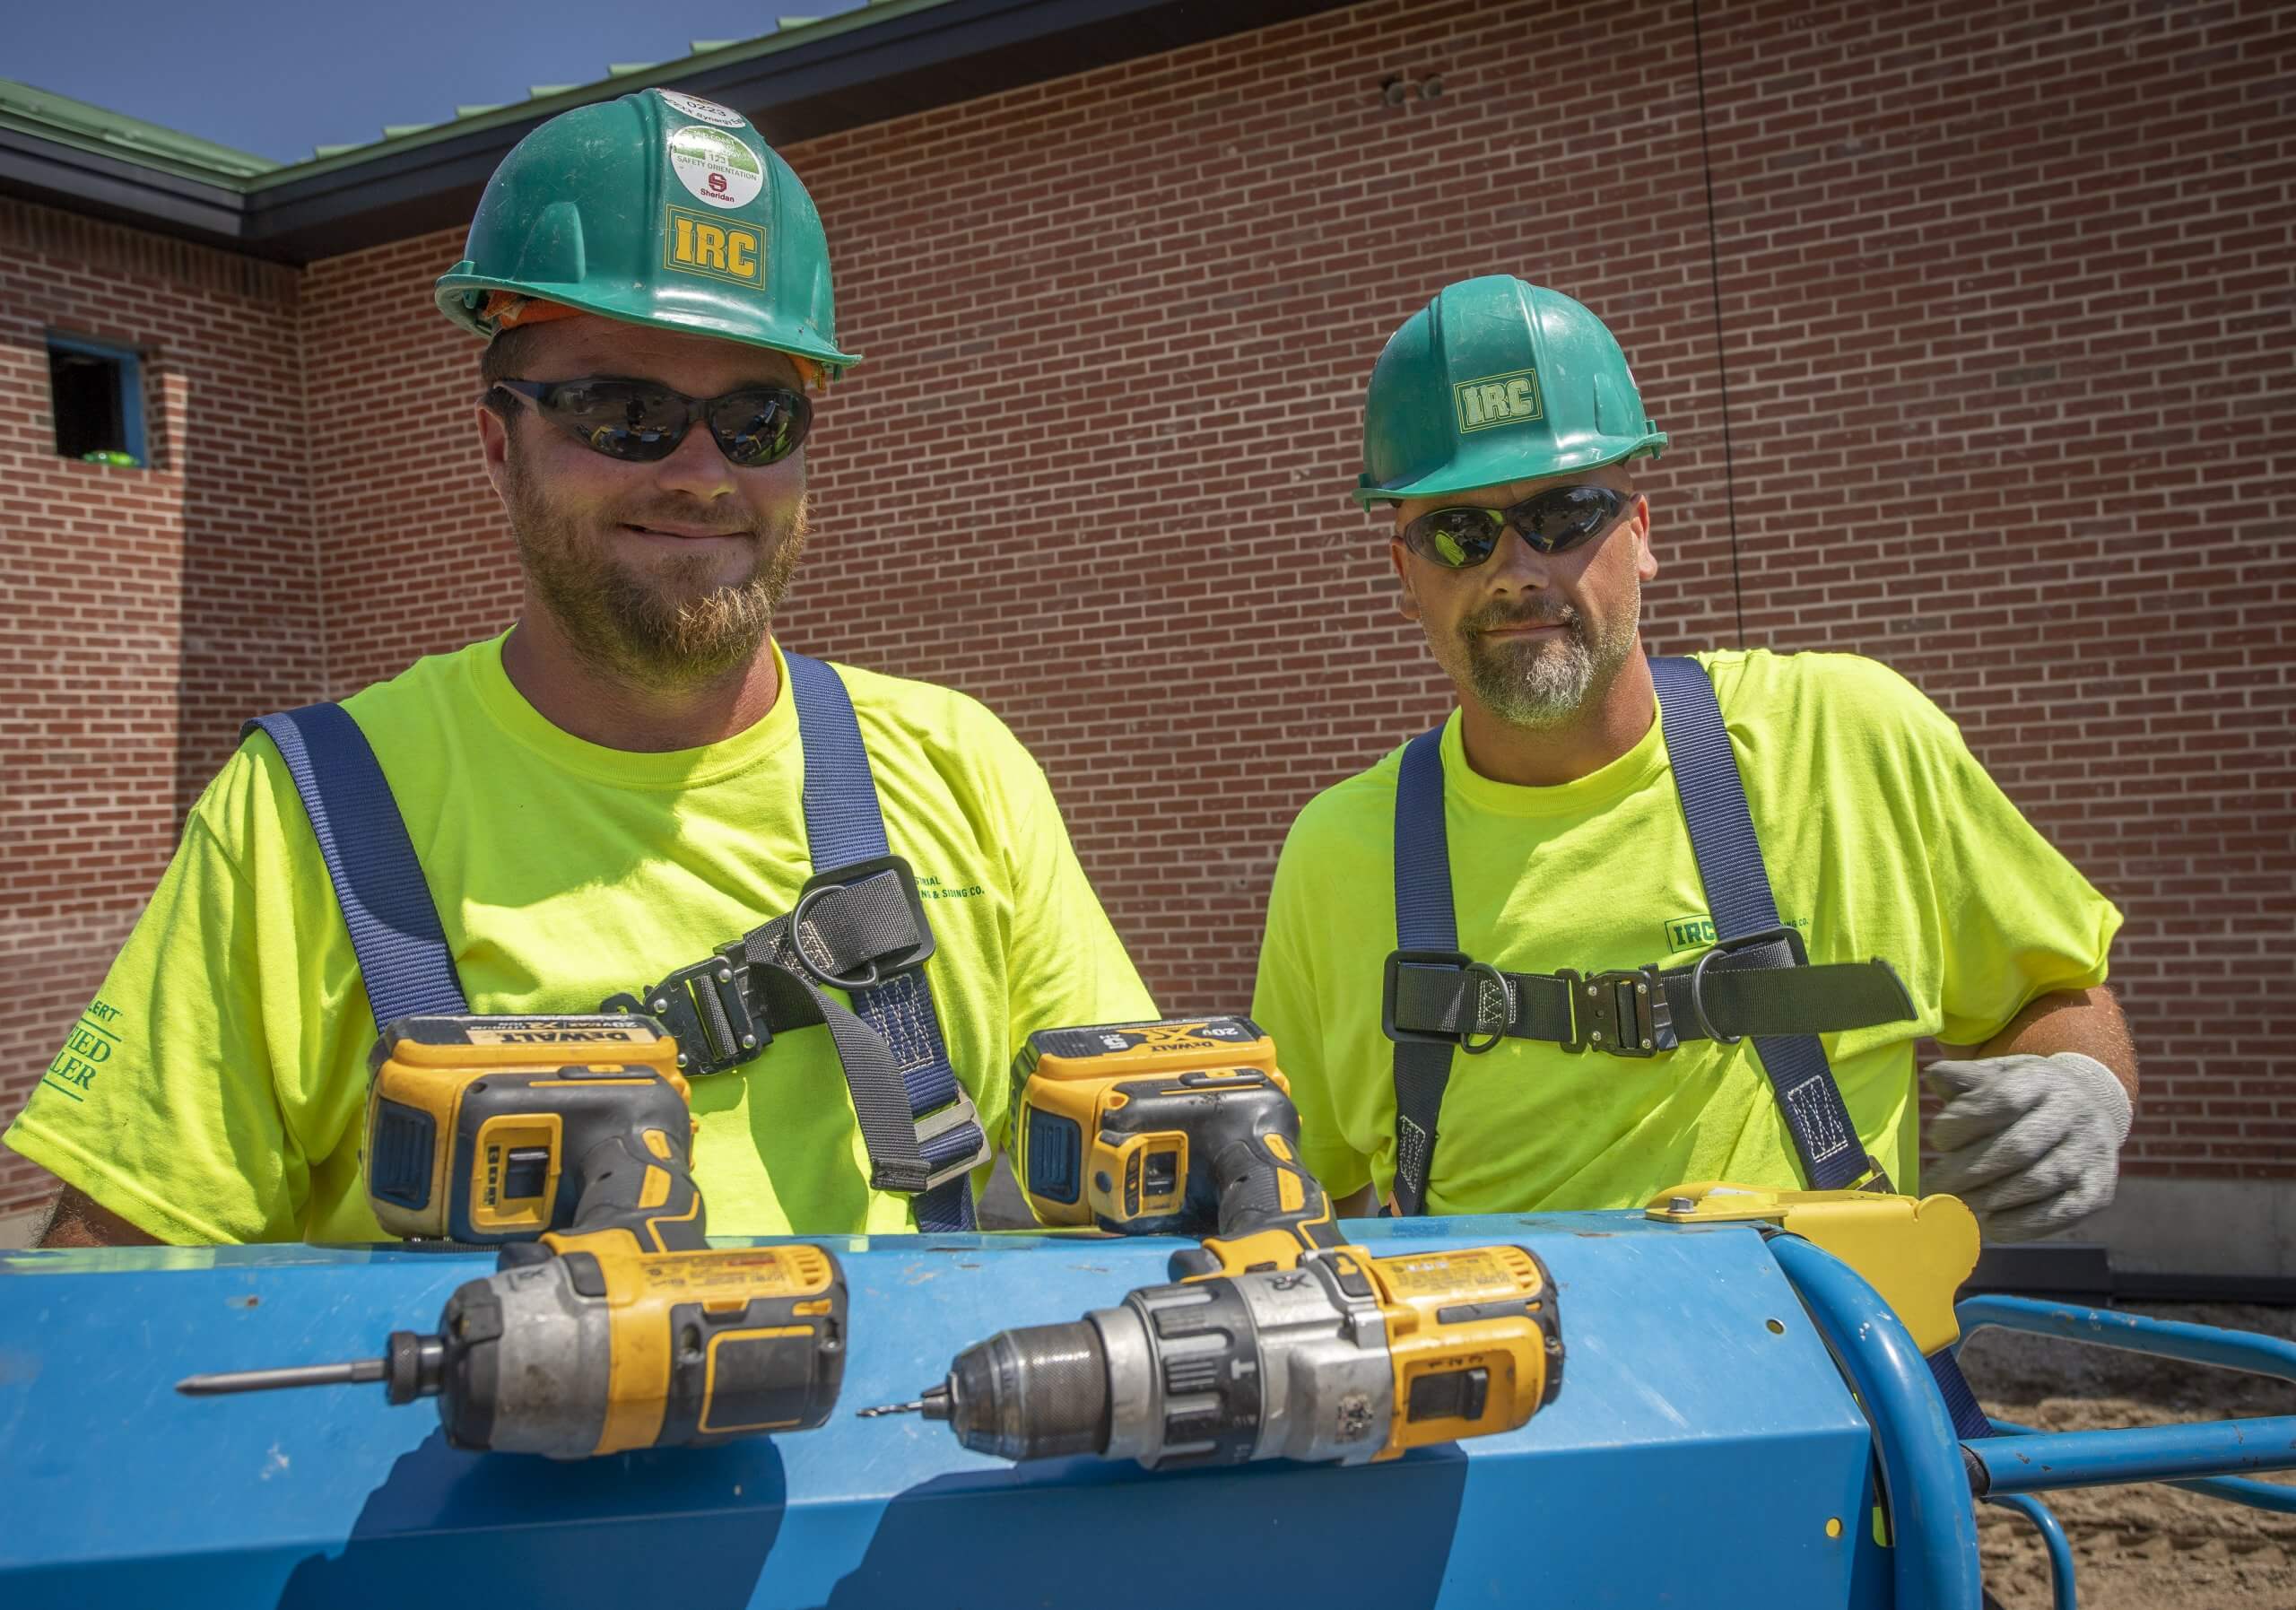 Two roofing technicians smile while at a job site wearing hardhats, safety harnesses and with tools